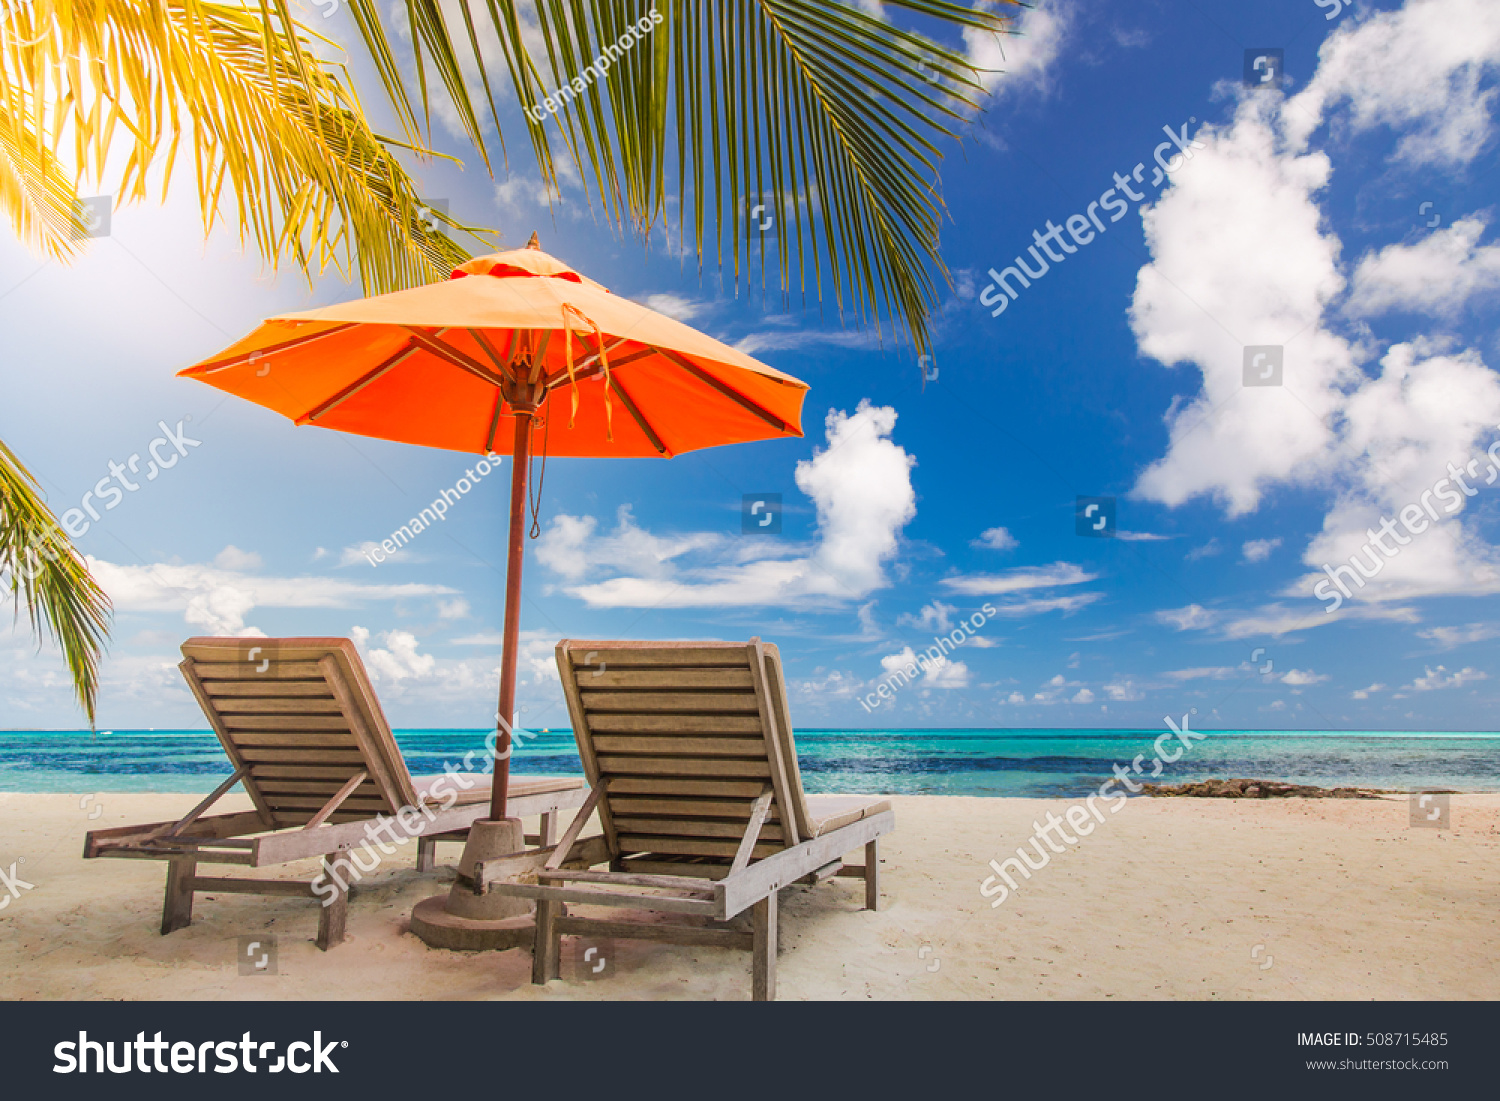 Beautiful tropical beach landscape. White sand and coco palms landscape background concept. Amazing beach scene use for idyllic summer vacation and exotic holiday, luxury travel tourism destination #508715485